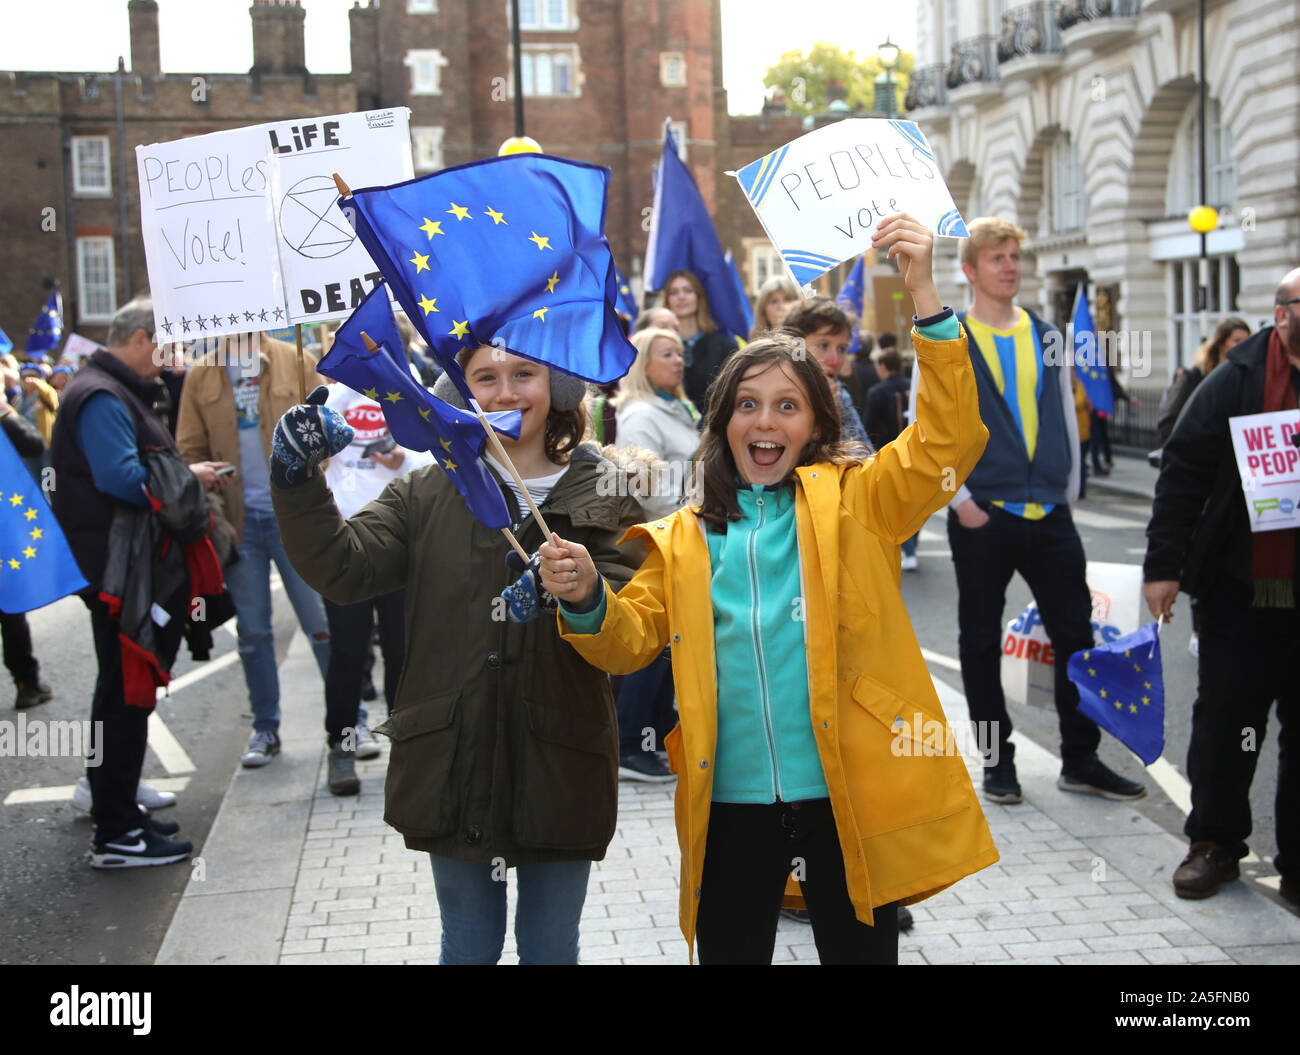 London, UK. 19th Oct 2019. Two girls supporting the EU as hundreds of thousands of people demonstrate en route to Parliament in a 'People's Vote - Final Say' march. The House of Commons is sitting, for the first time in 37 yards, on a Saturday to discuss the new Brexit deal. People's vote march, London, UK on October 19, 2019. Credit: Paul Marriott/Alamy Live News Stock Photo